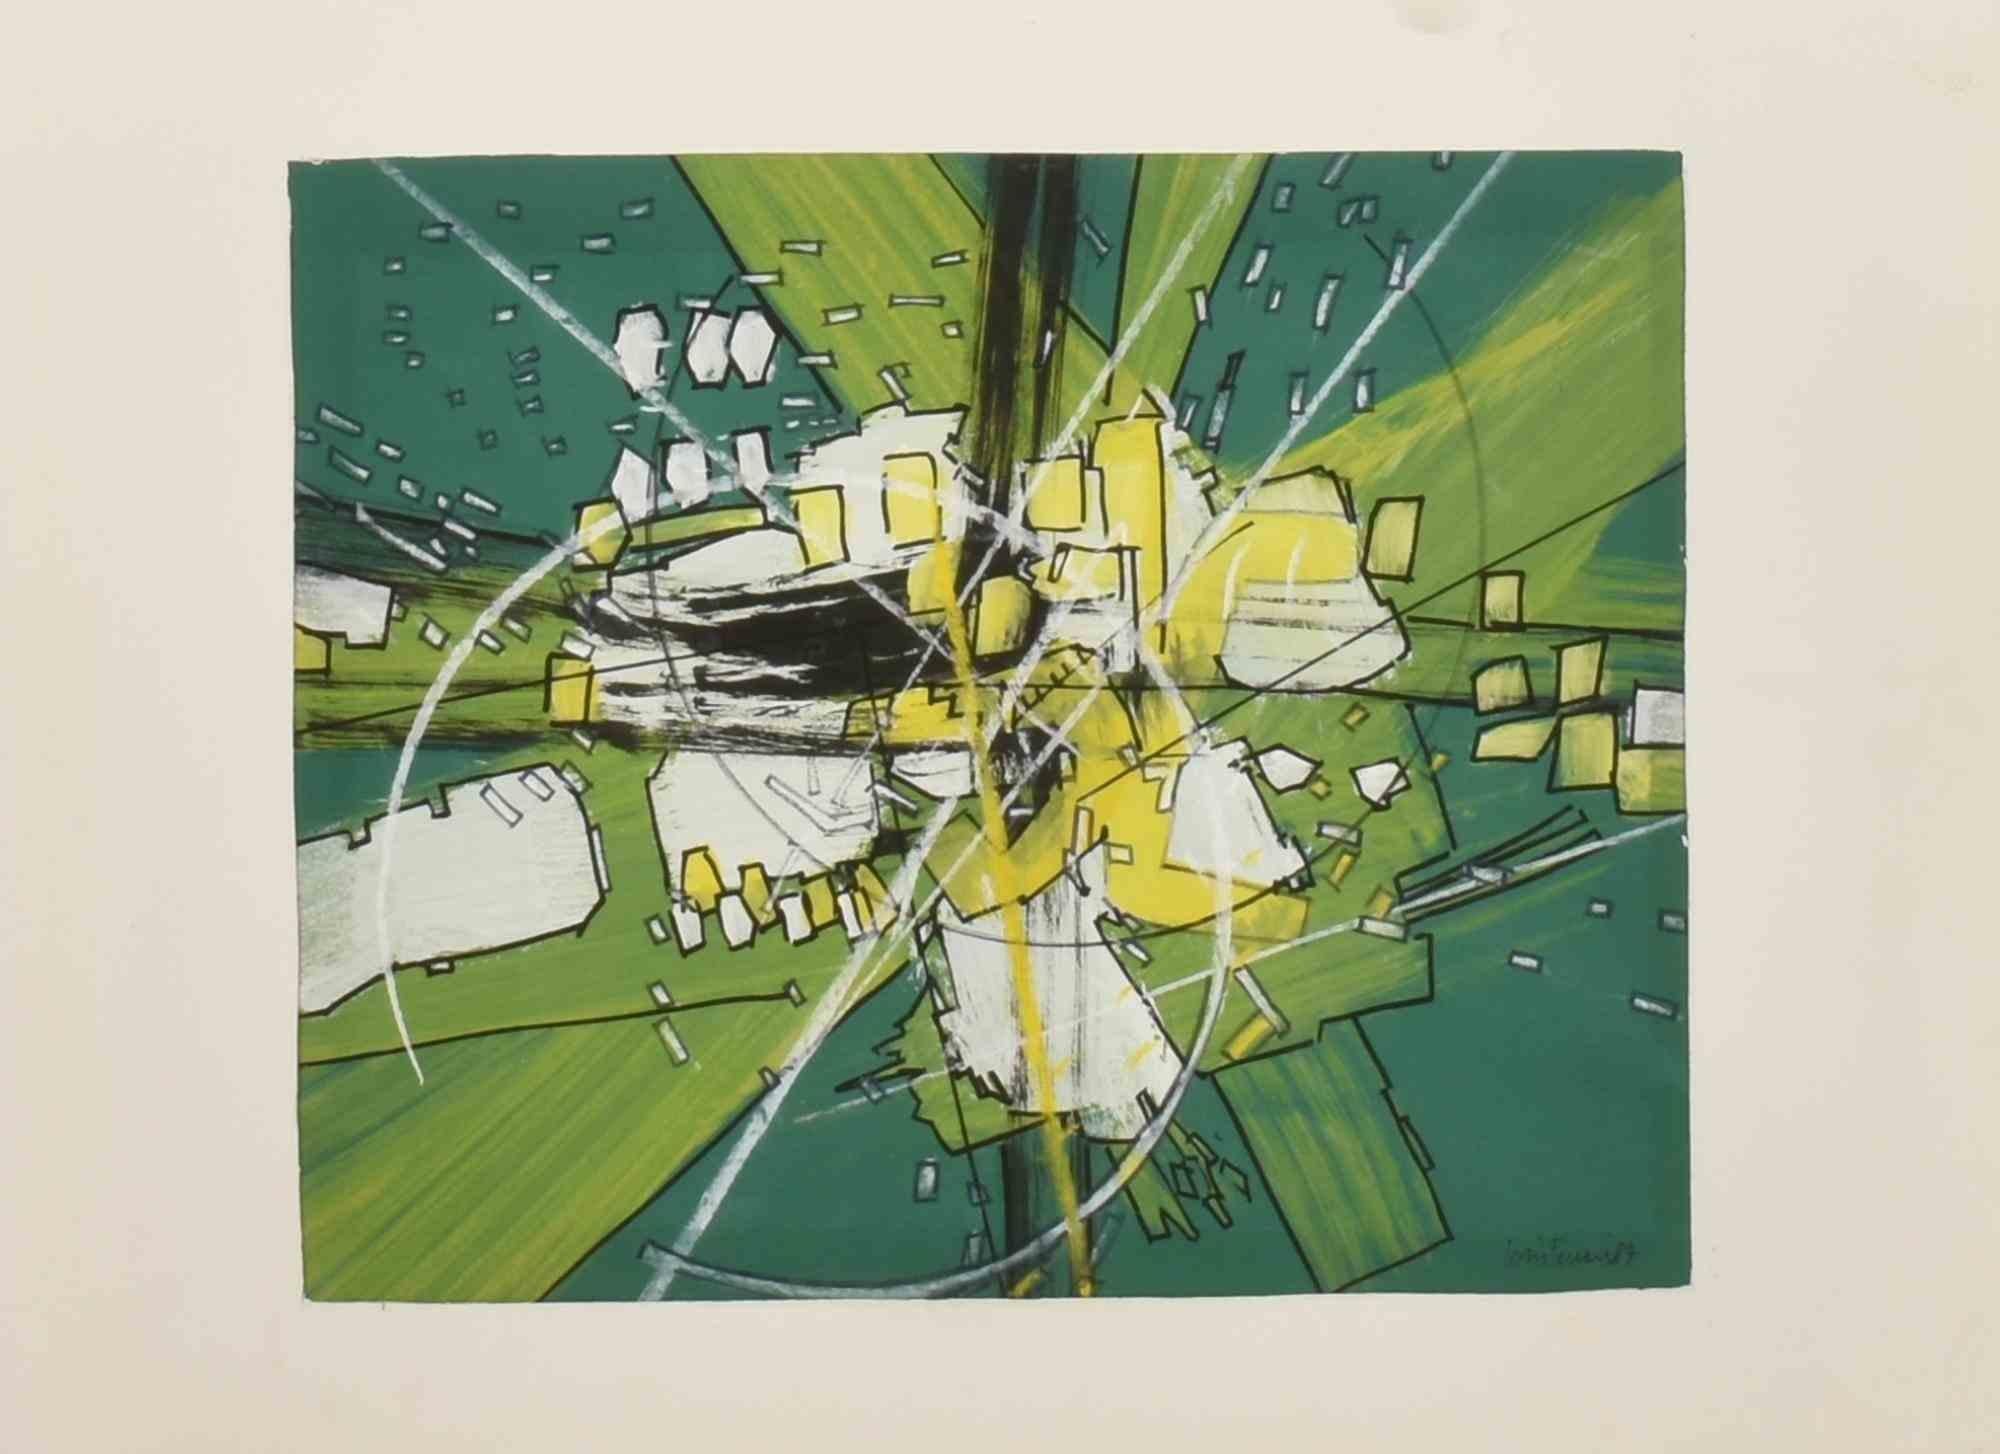 Abstract Composition - Original Drawing by Loris Ferrari - 1987